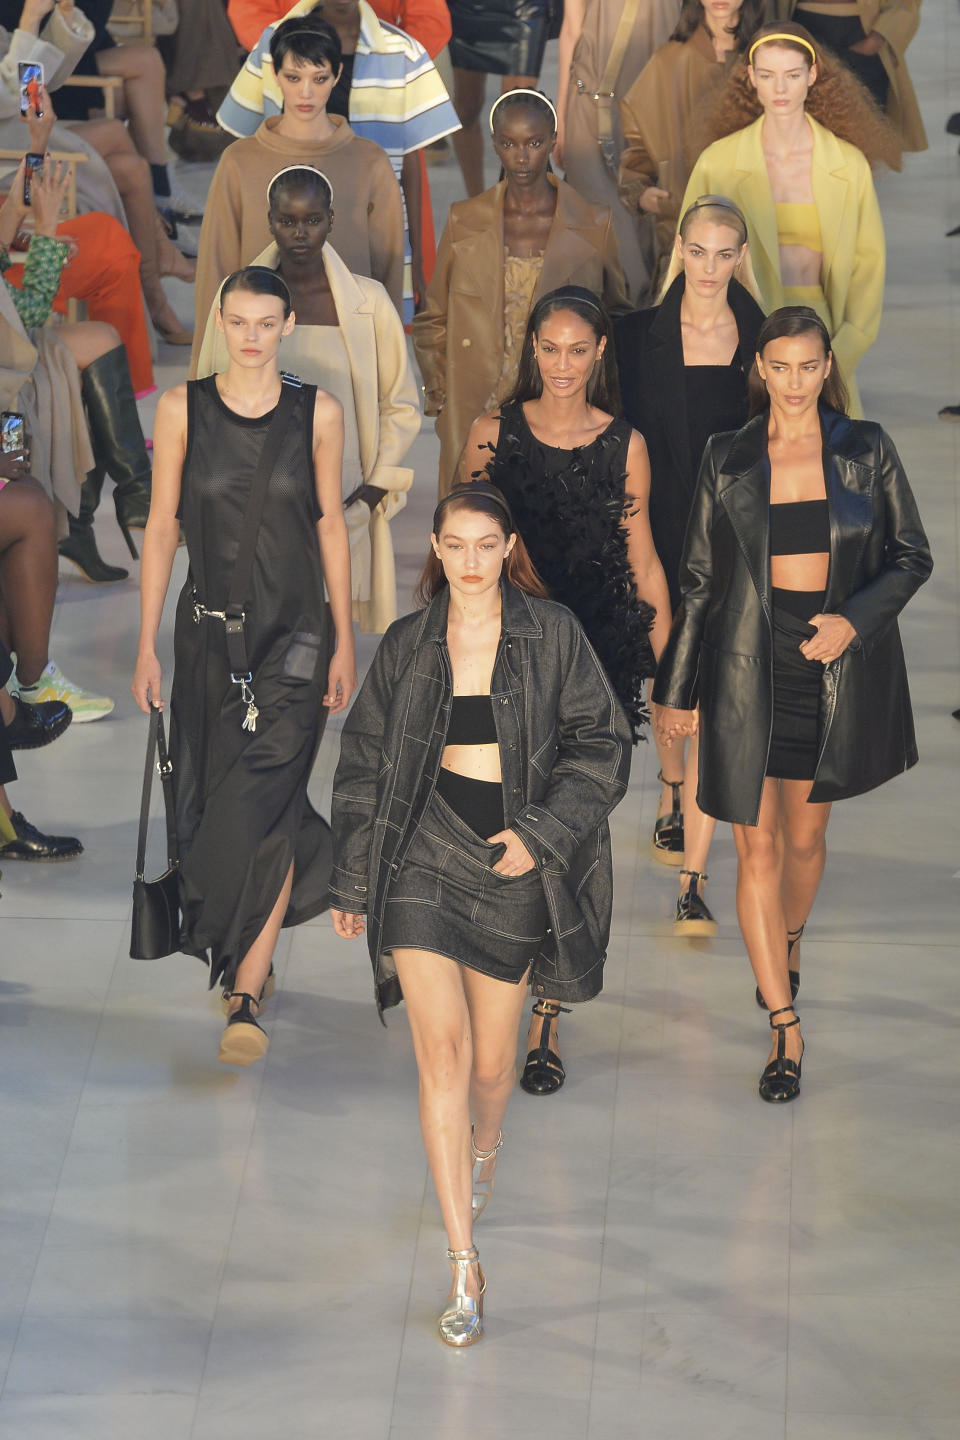 Gigi Hadid leads a group of models for the finale of Max Mara’s Spring ’22 runway show. - Credit: Agostino Fabio / MEGA